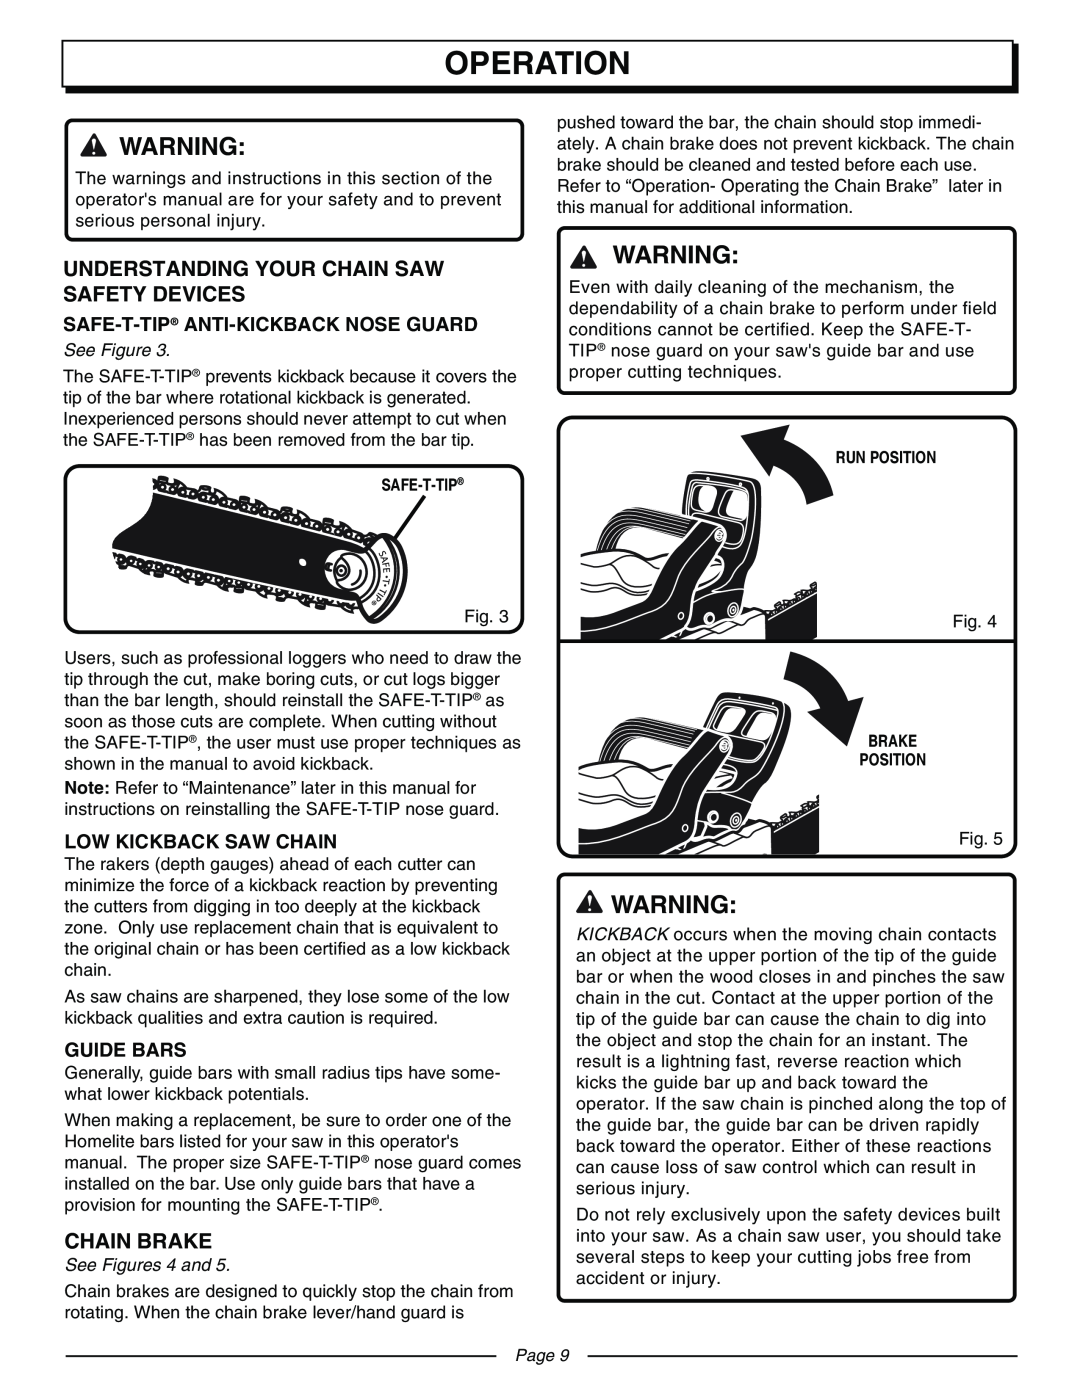 Homelite UT10942D Operation, Understanding Your Chain Saw Safety Devices, Chain Brake, Safe-T-Tip Anti-Kickbacknose Guard 